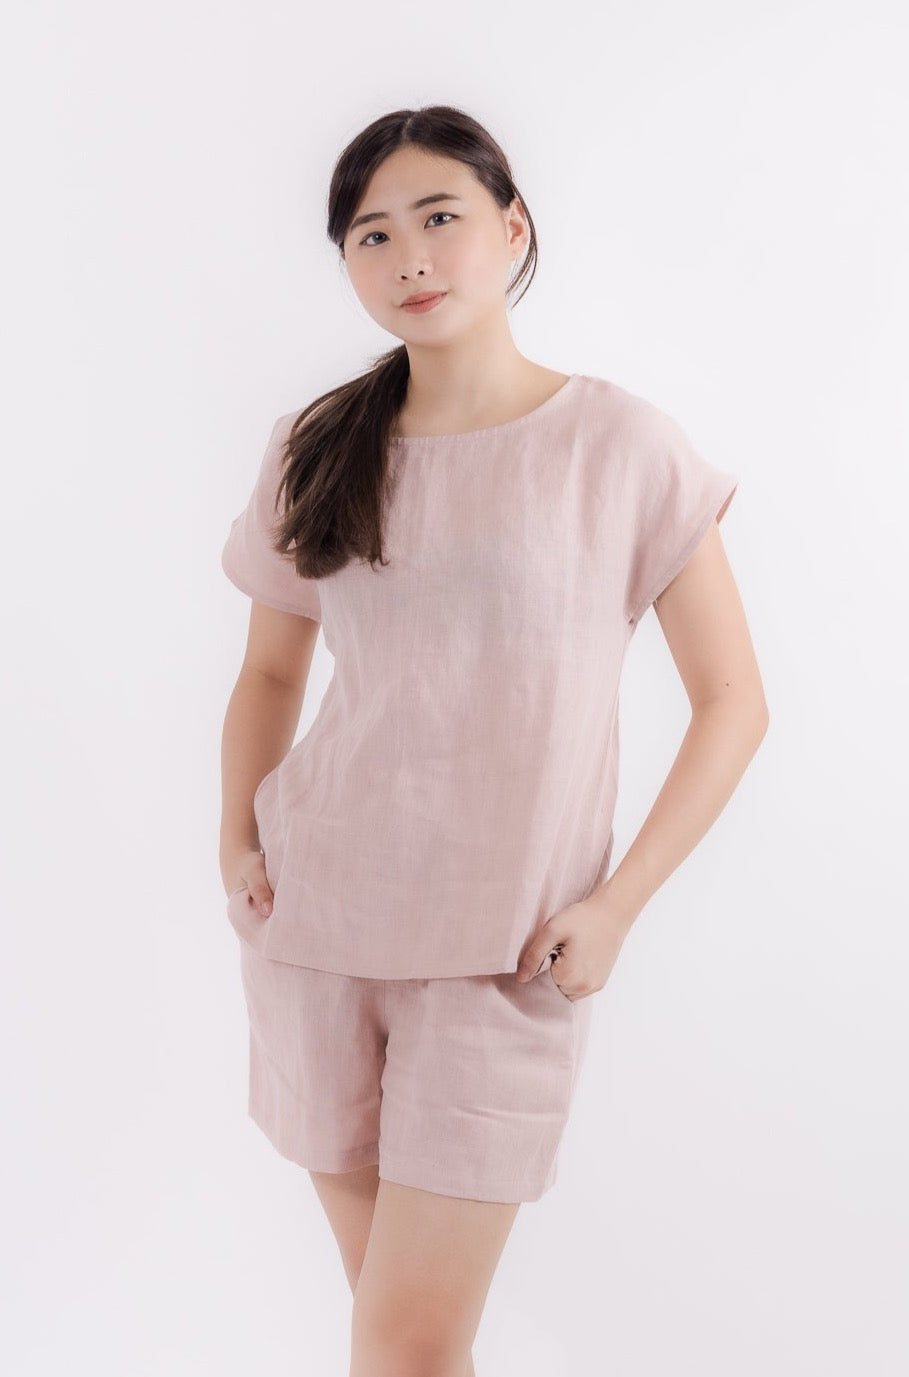 Linen Short Sleeve Top in Dusty Pink by You Living, available online with free Singapore delivery